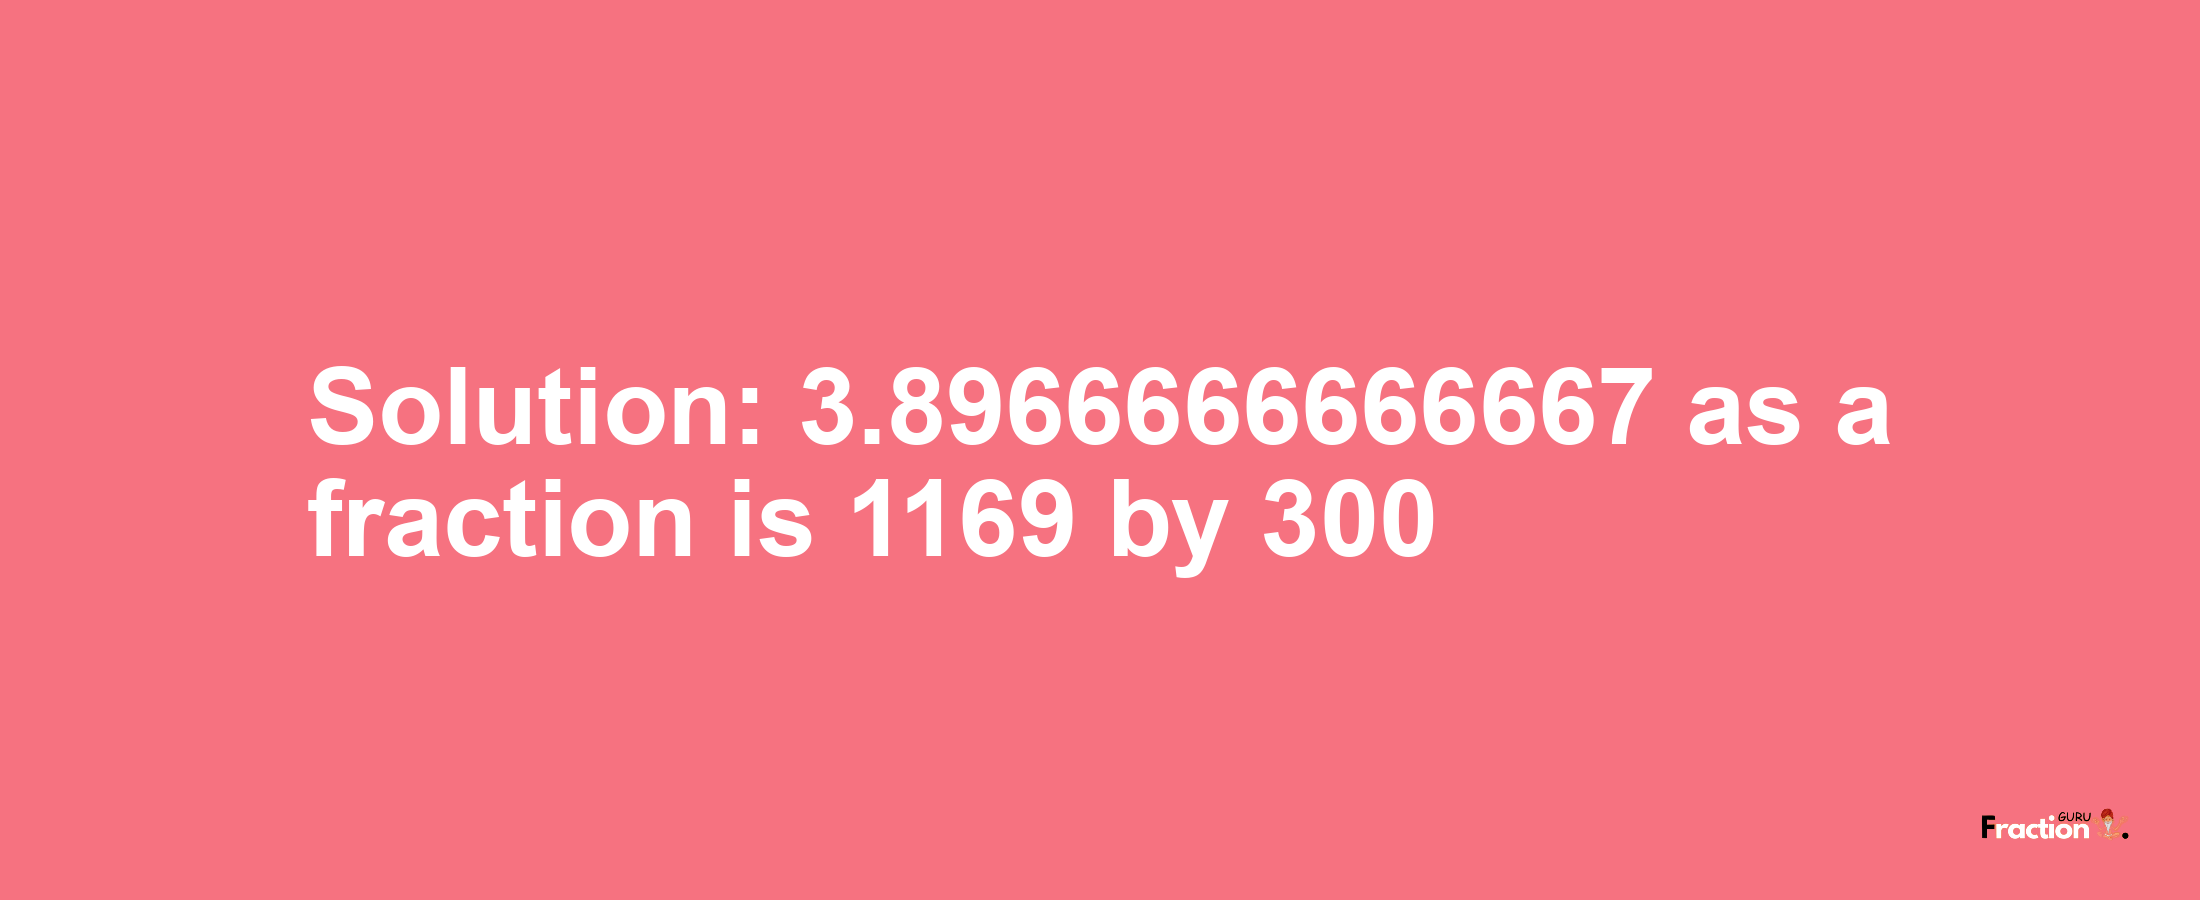 Solution:3.8966666666667 as a fraction is 1169/300